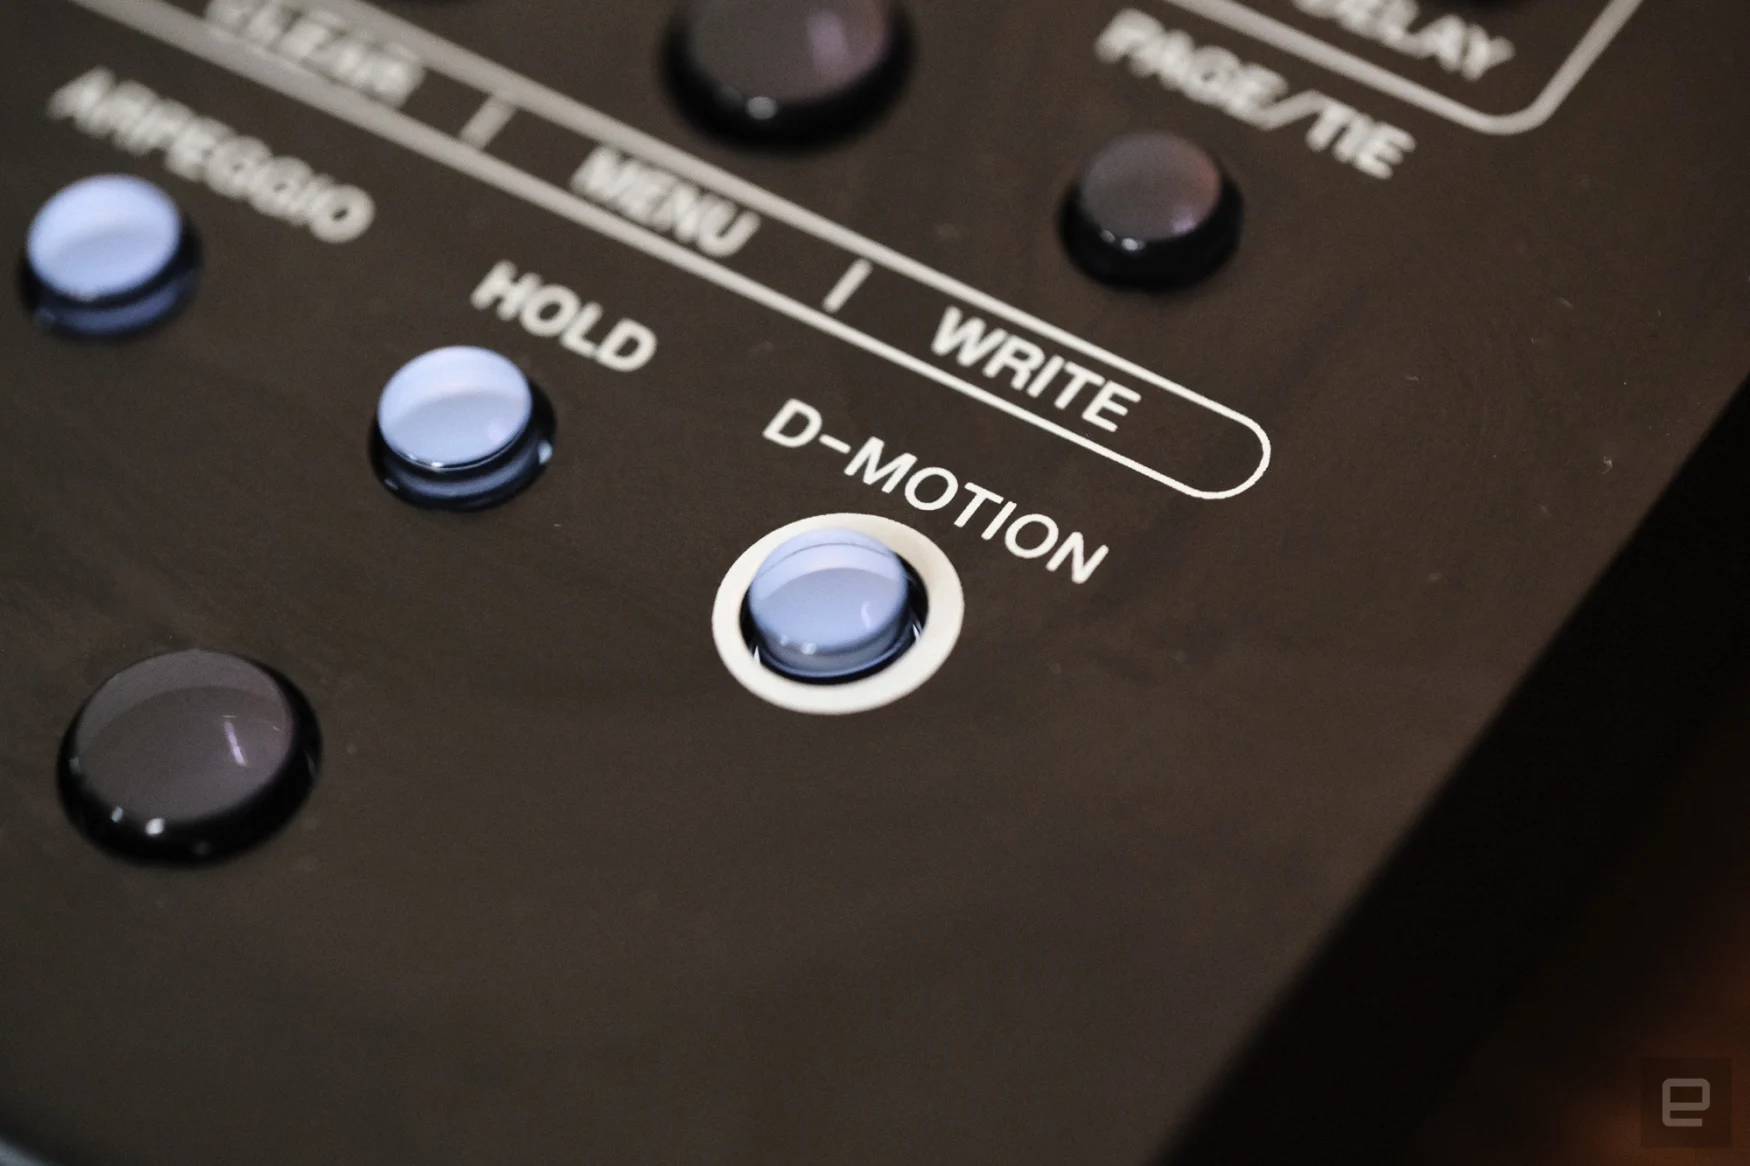 The D-Motion button on the Roland SH-4d.